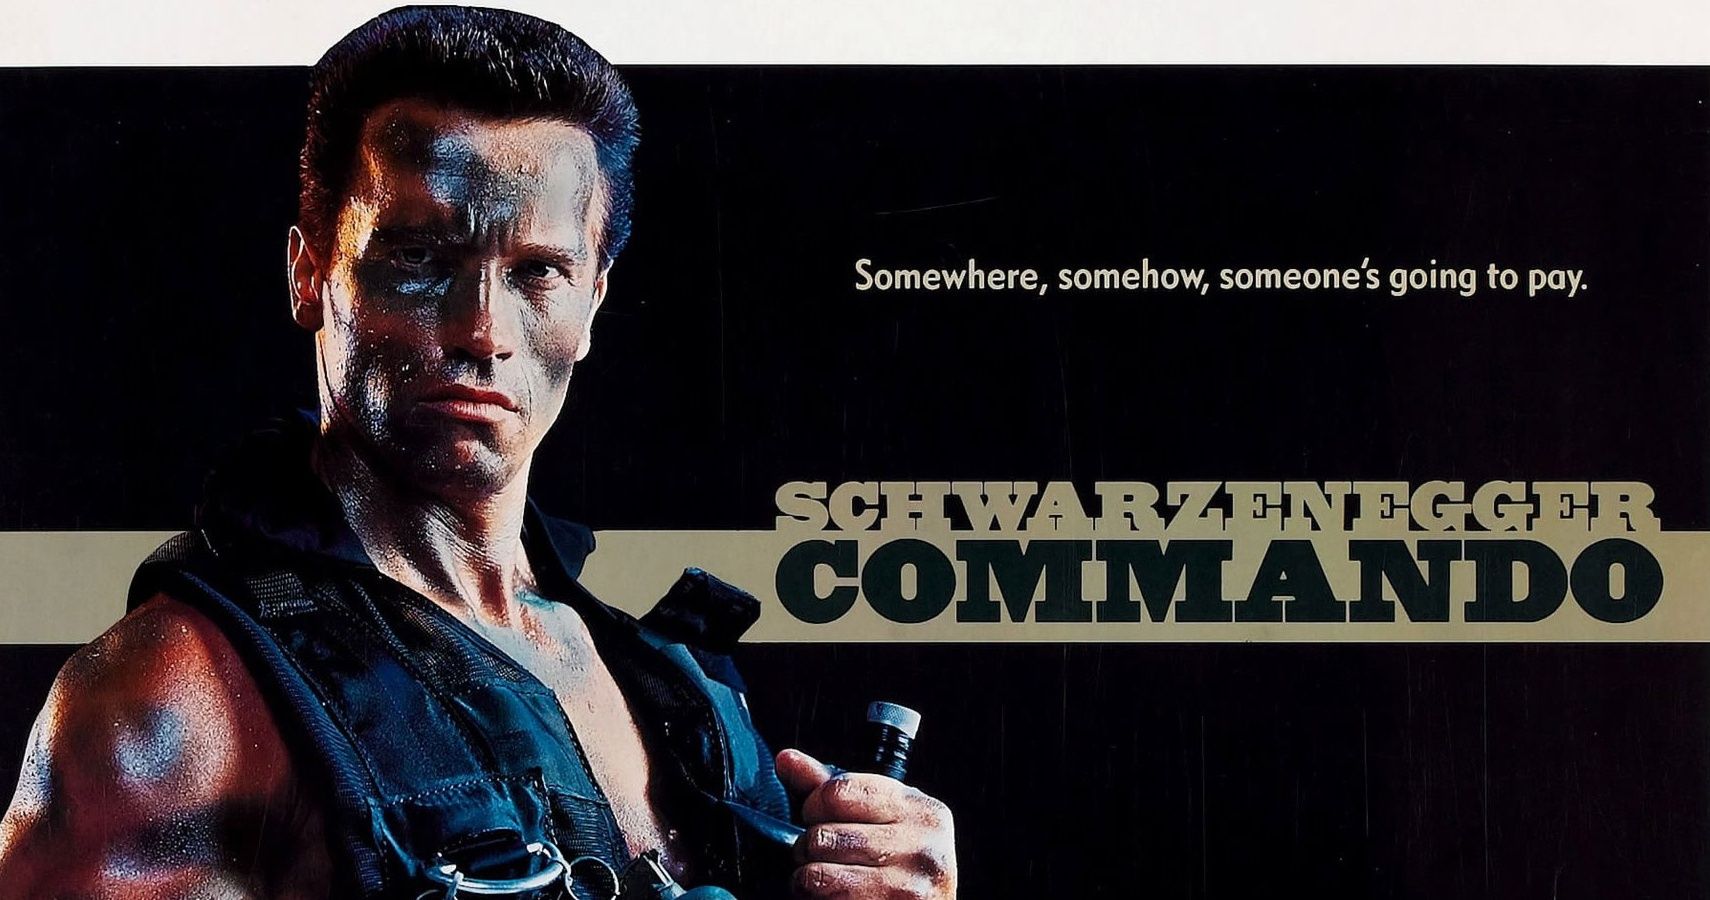 was there ever a commando 2 movie with arnold